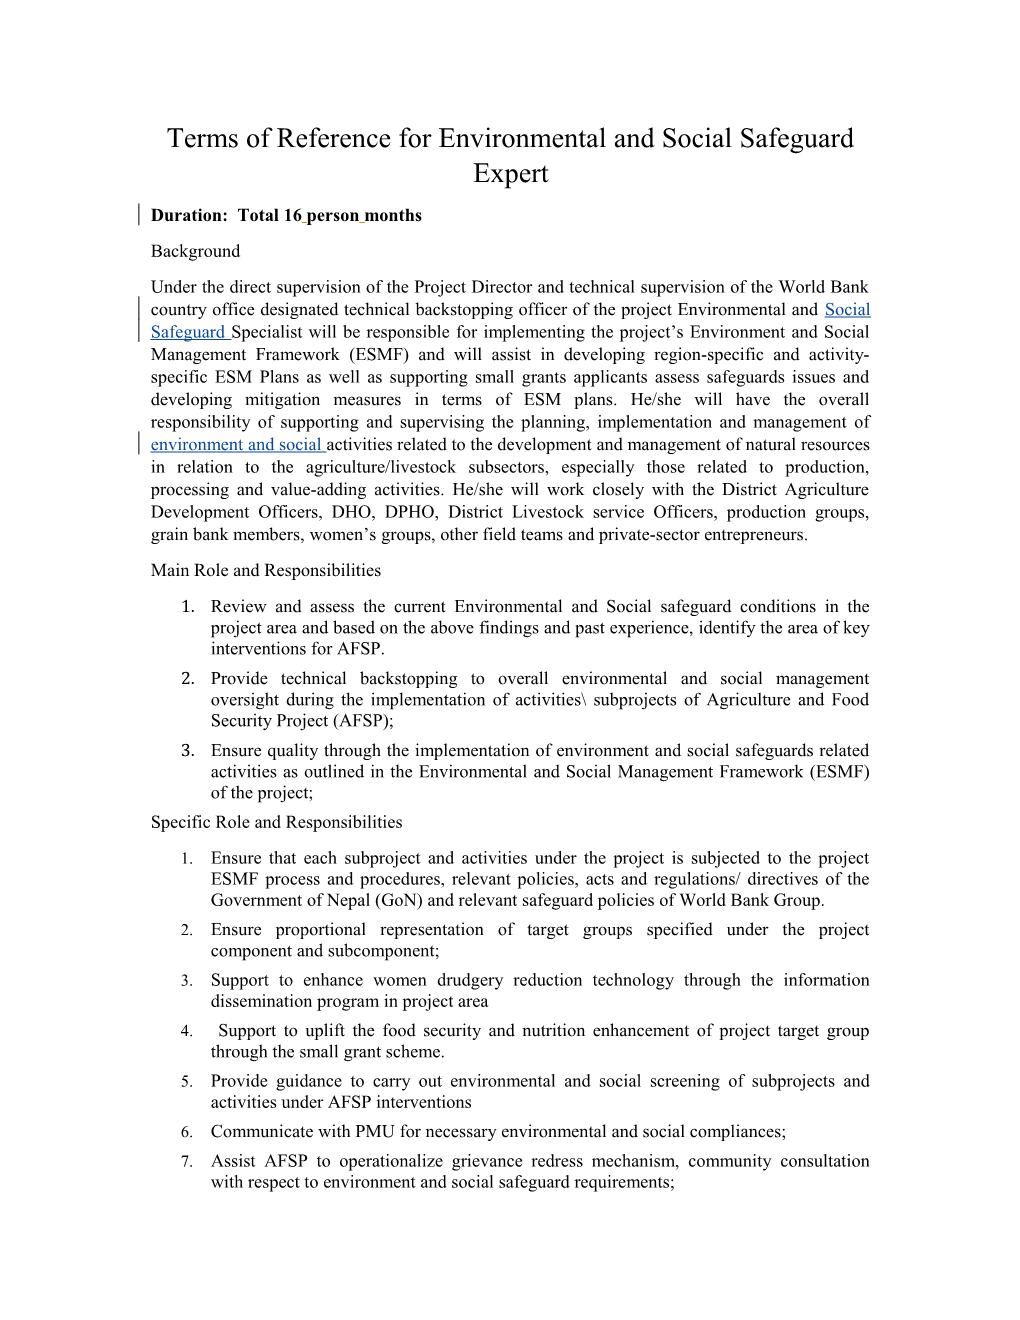 Terms of Reference for Environmental and Social Safeguard Expert